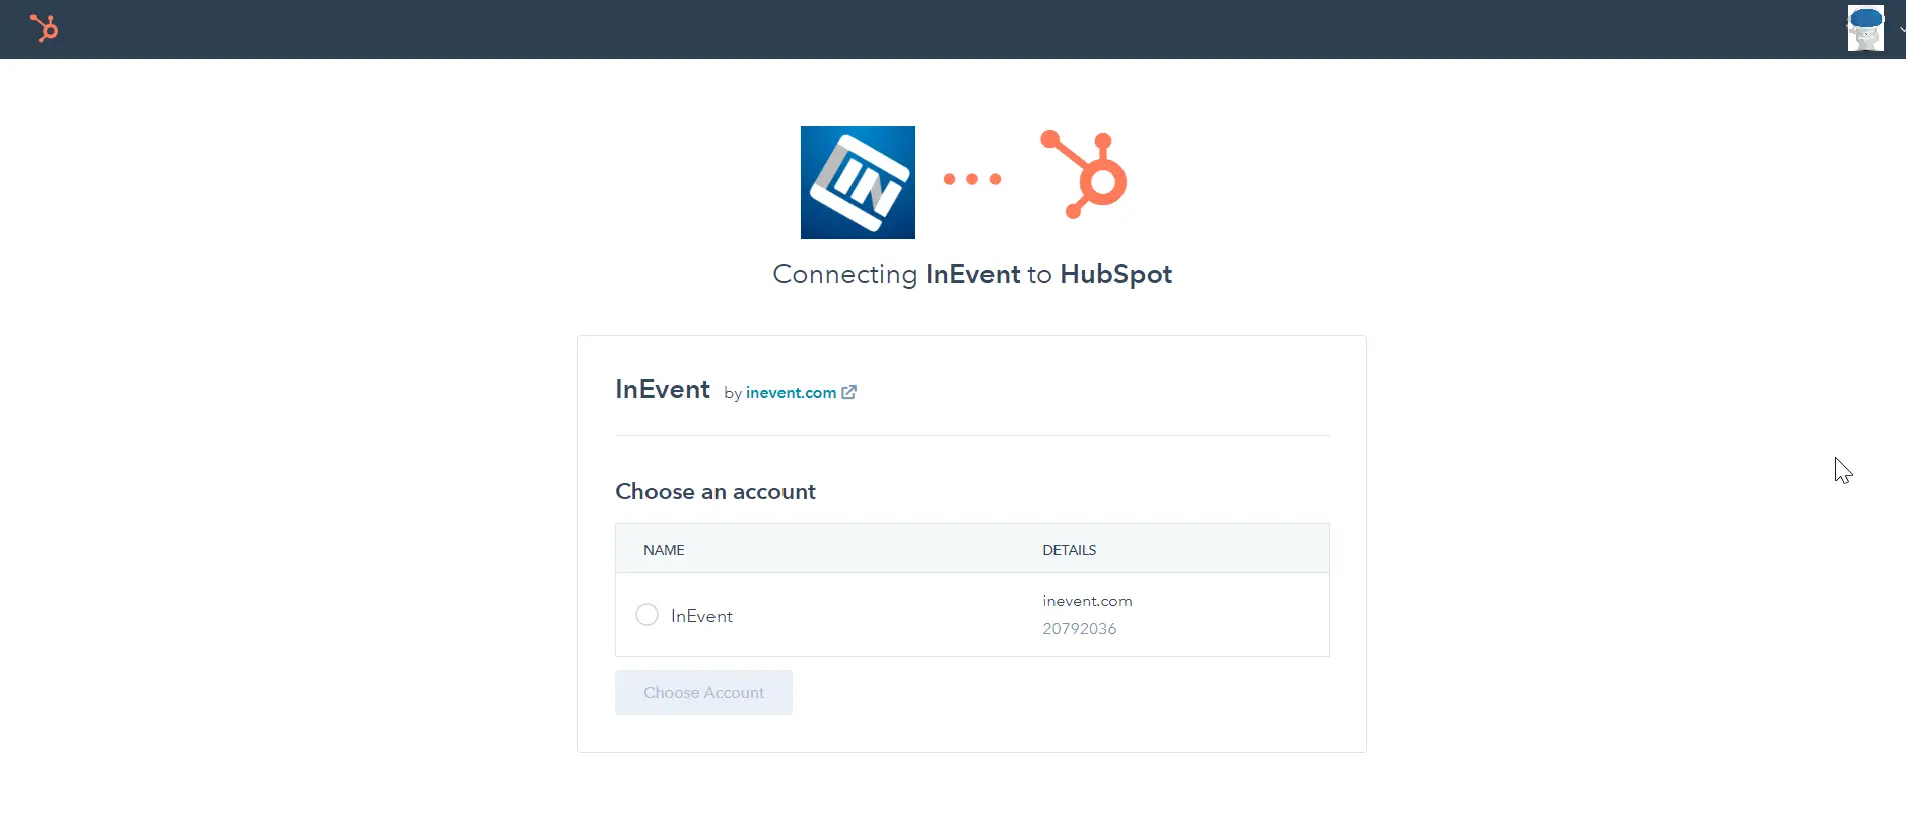 Accessing your HubSpot account